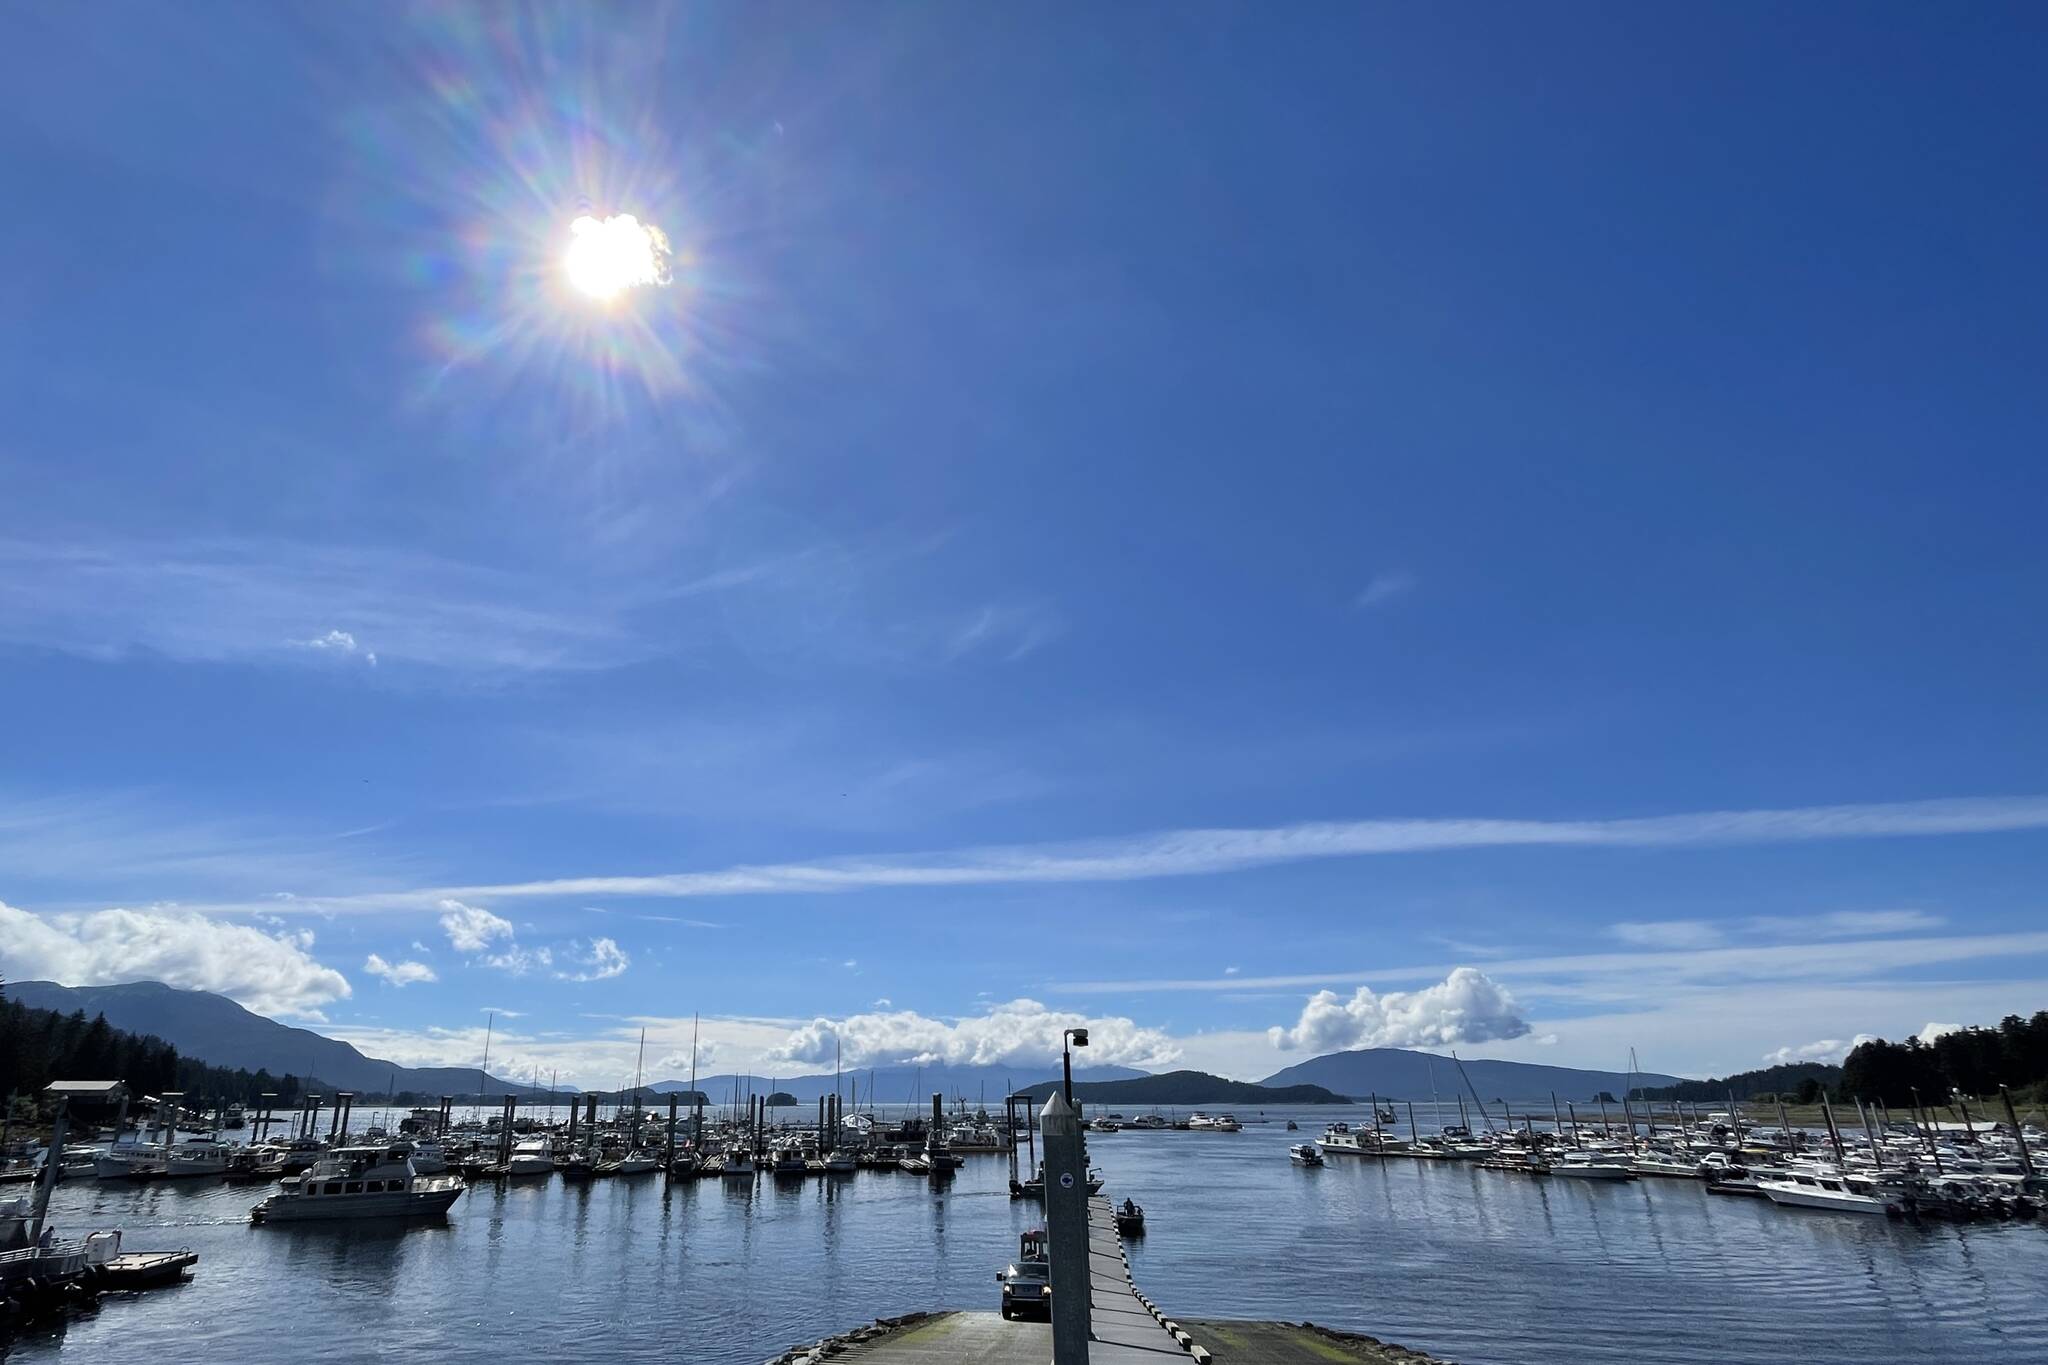 The sun shines over Auke Bay on Aug. 18 as a sunny weekend belies the coming autumn. (Michael S. Lockett / Juneau Empire)